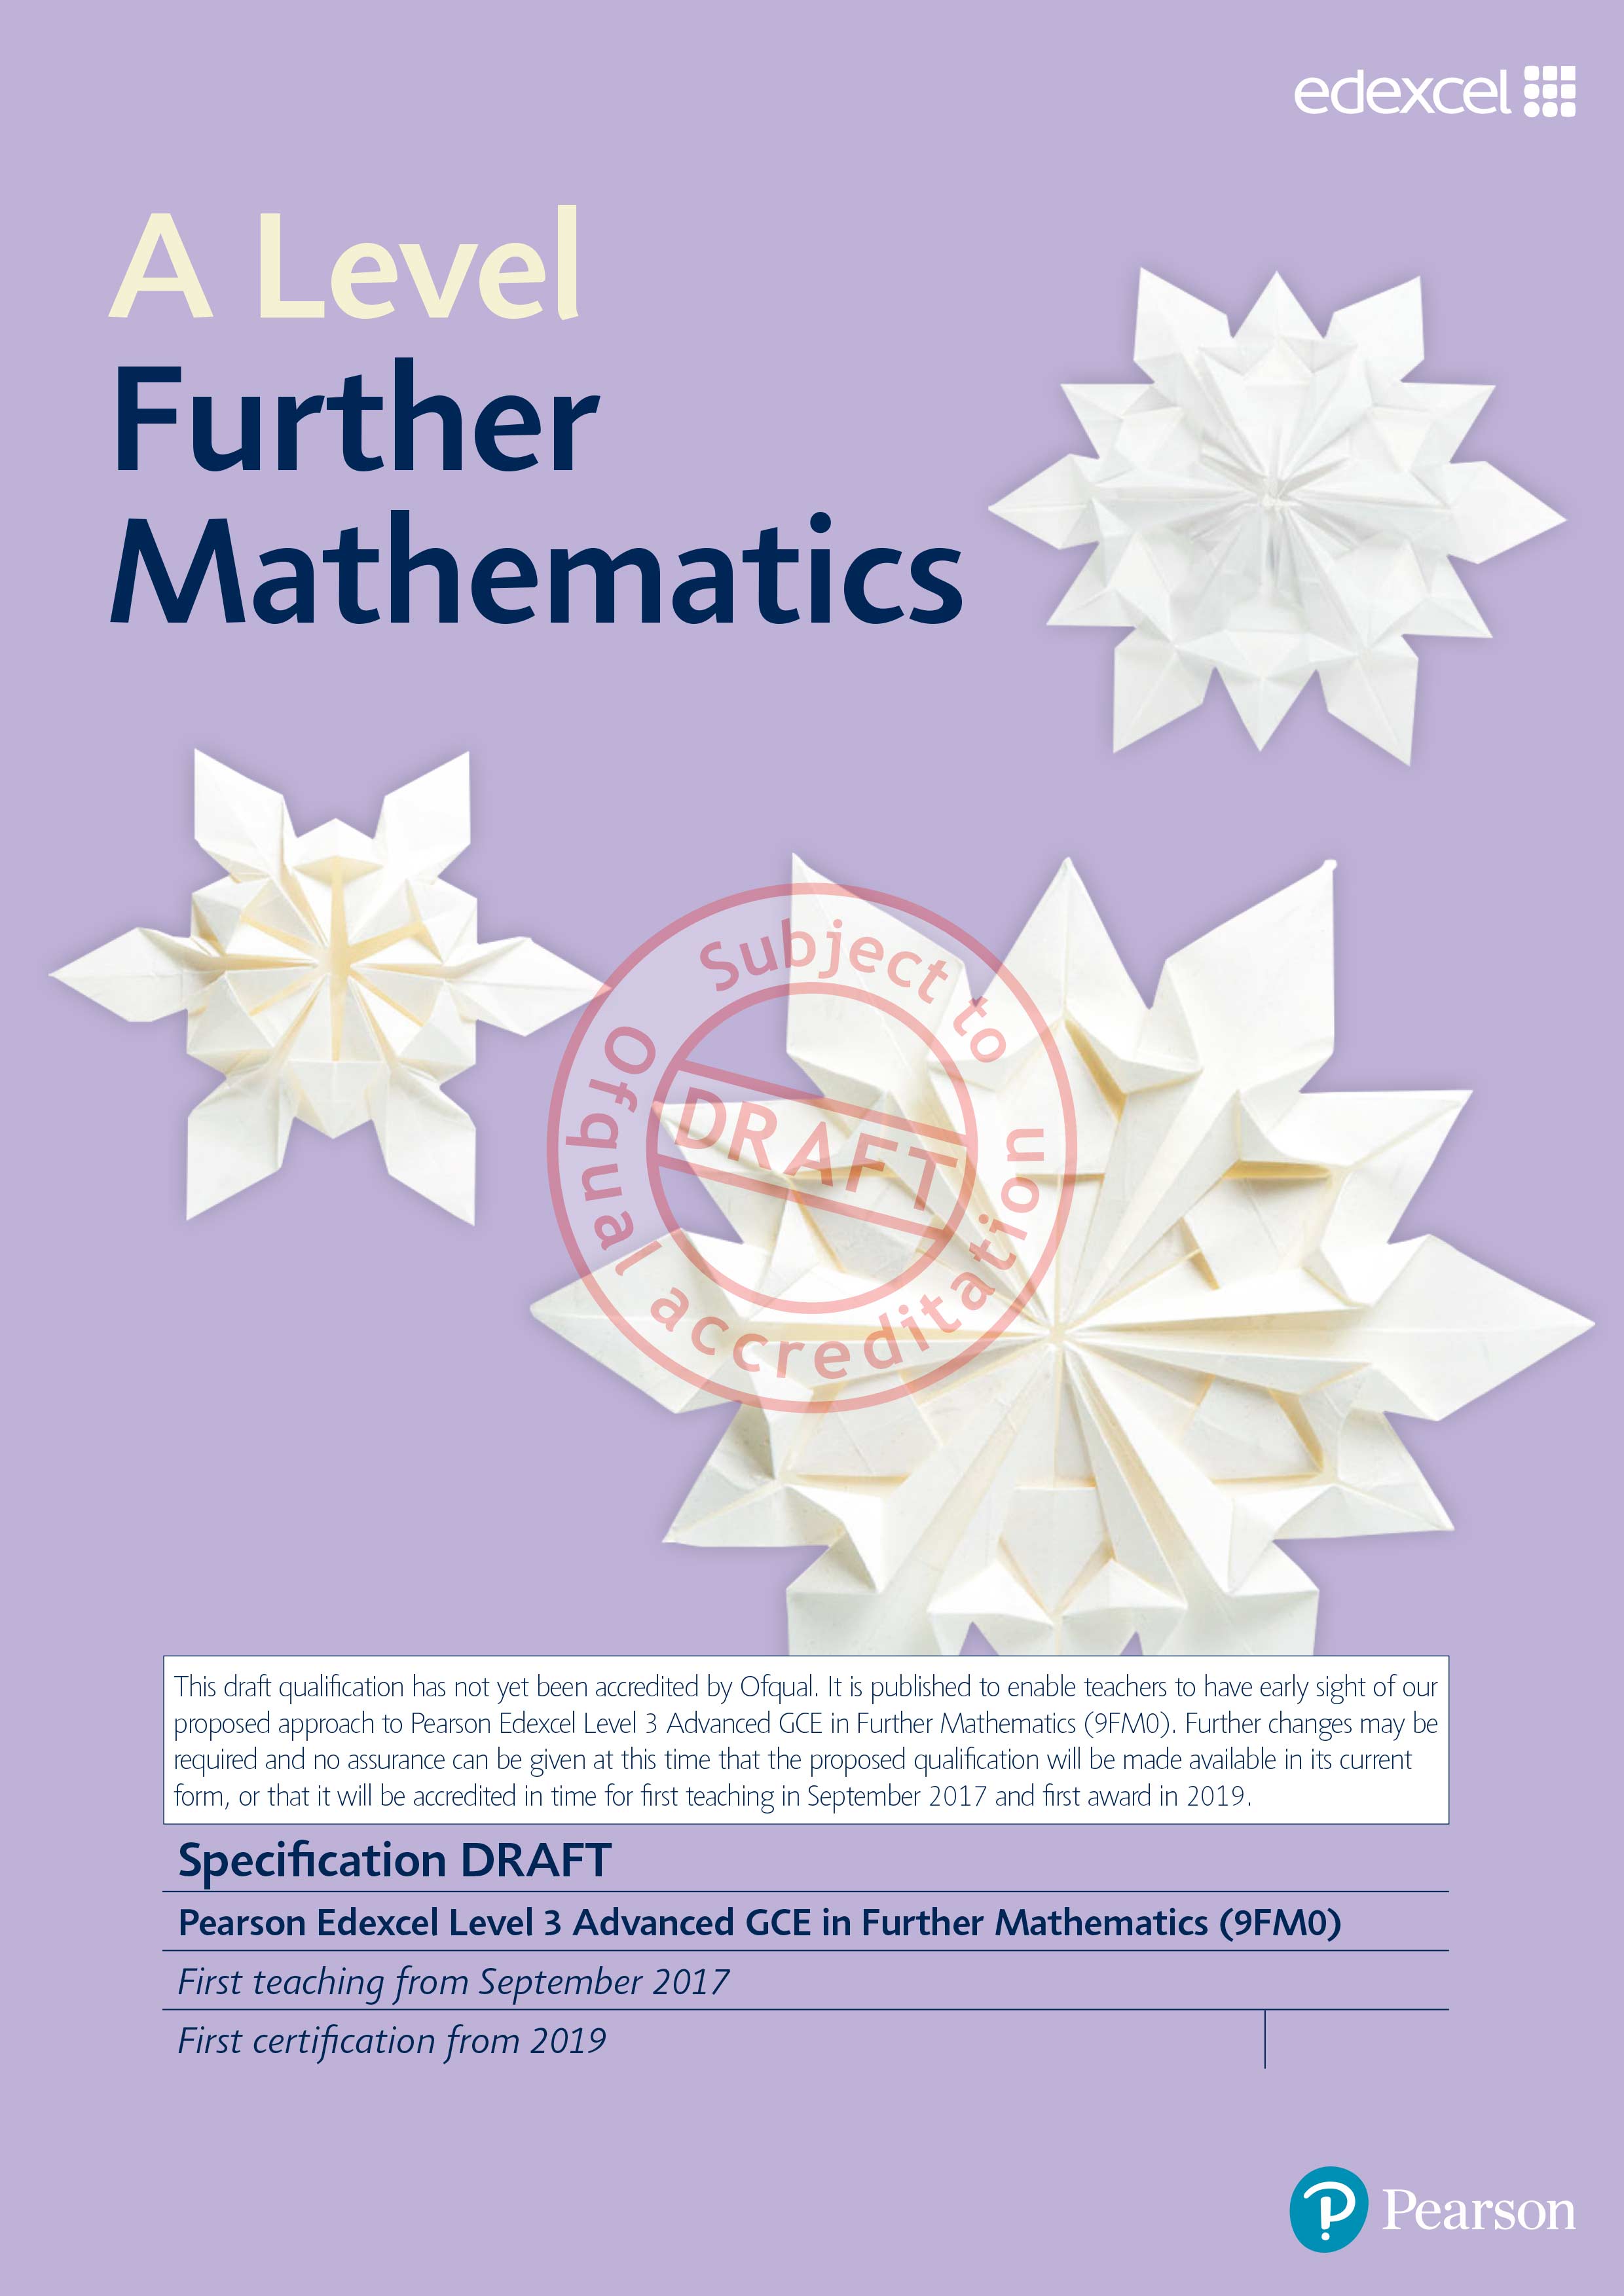 A level Further Mathematics specification for September 2017